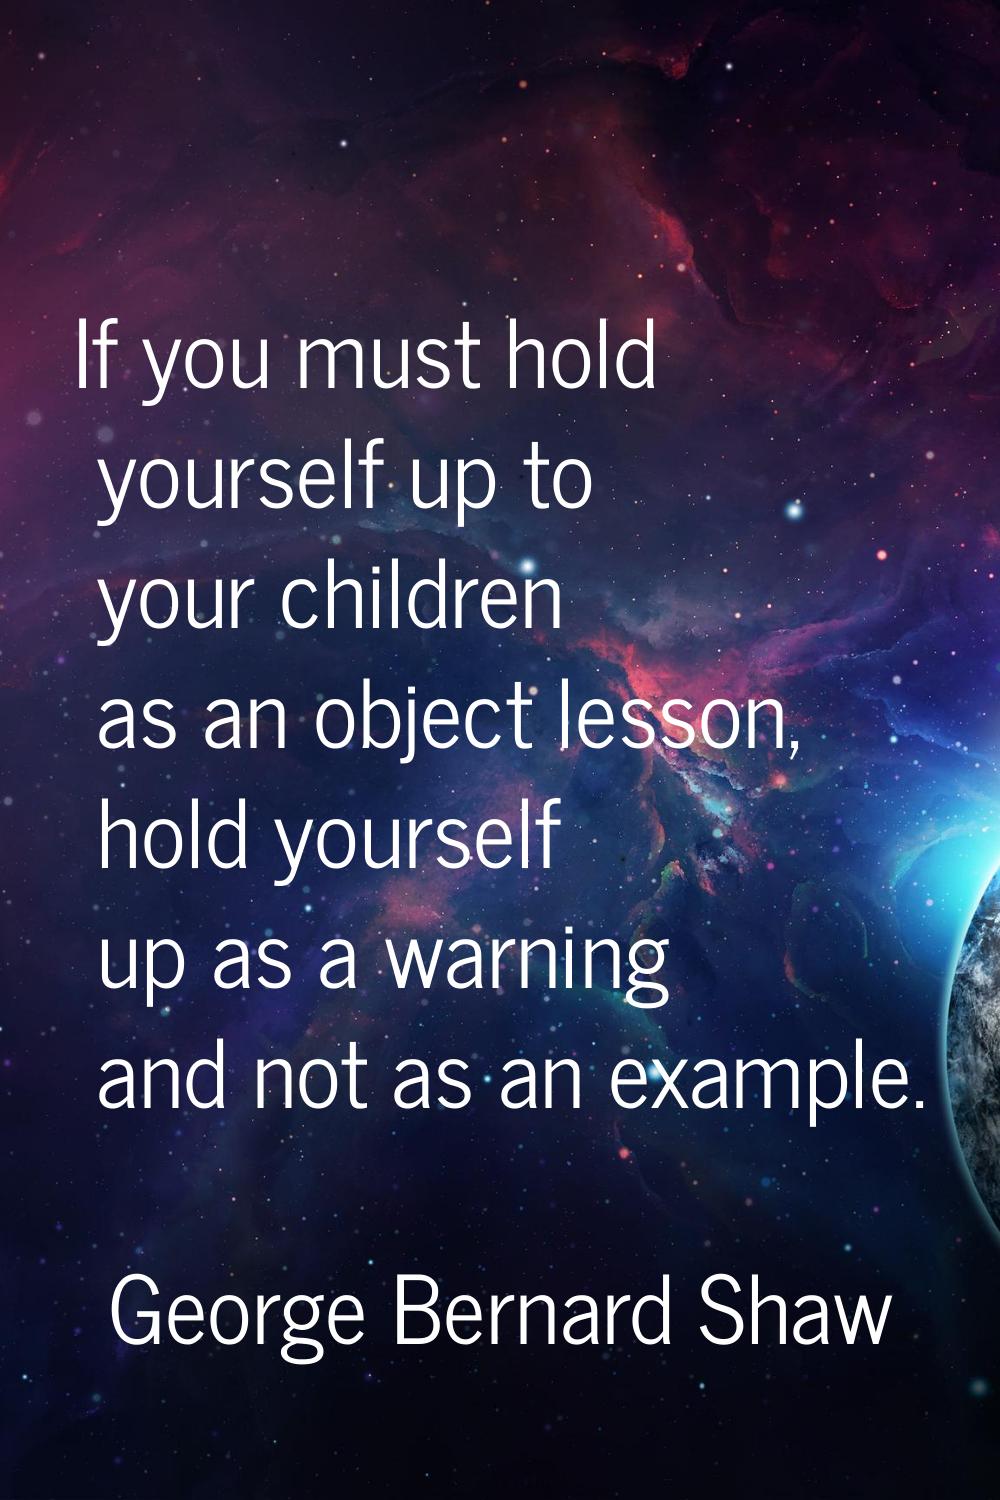 If you must hold yourself up to your children as an object lesson, hold yourself up as a warning an